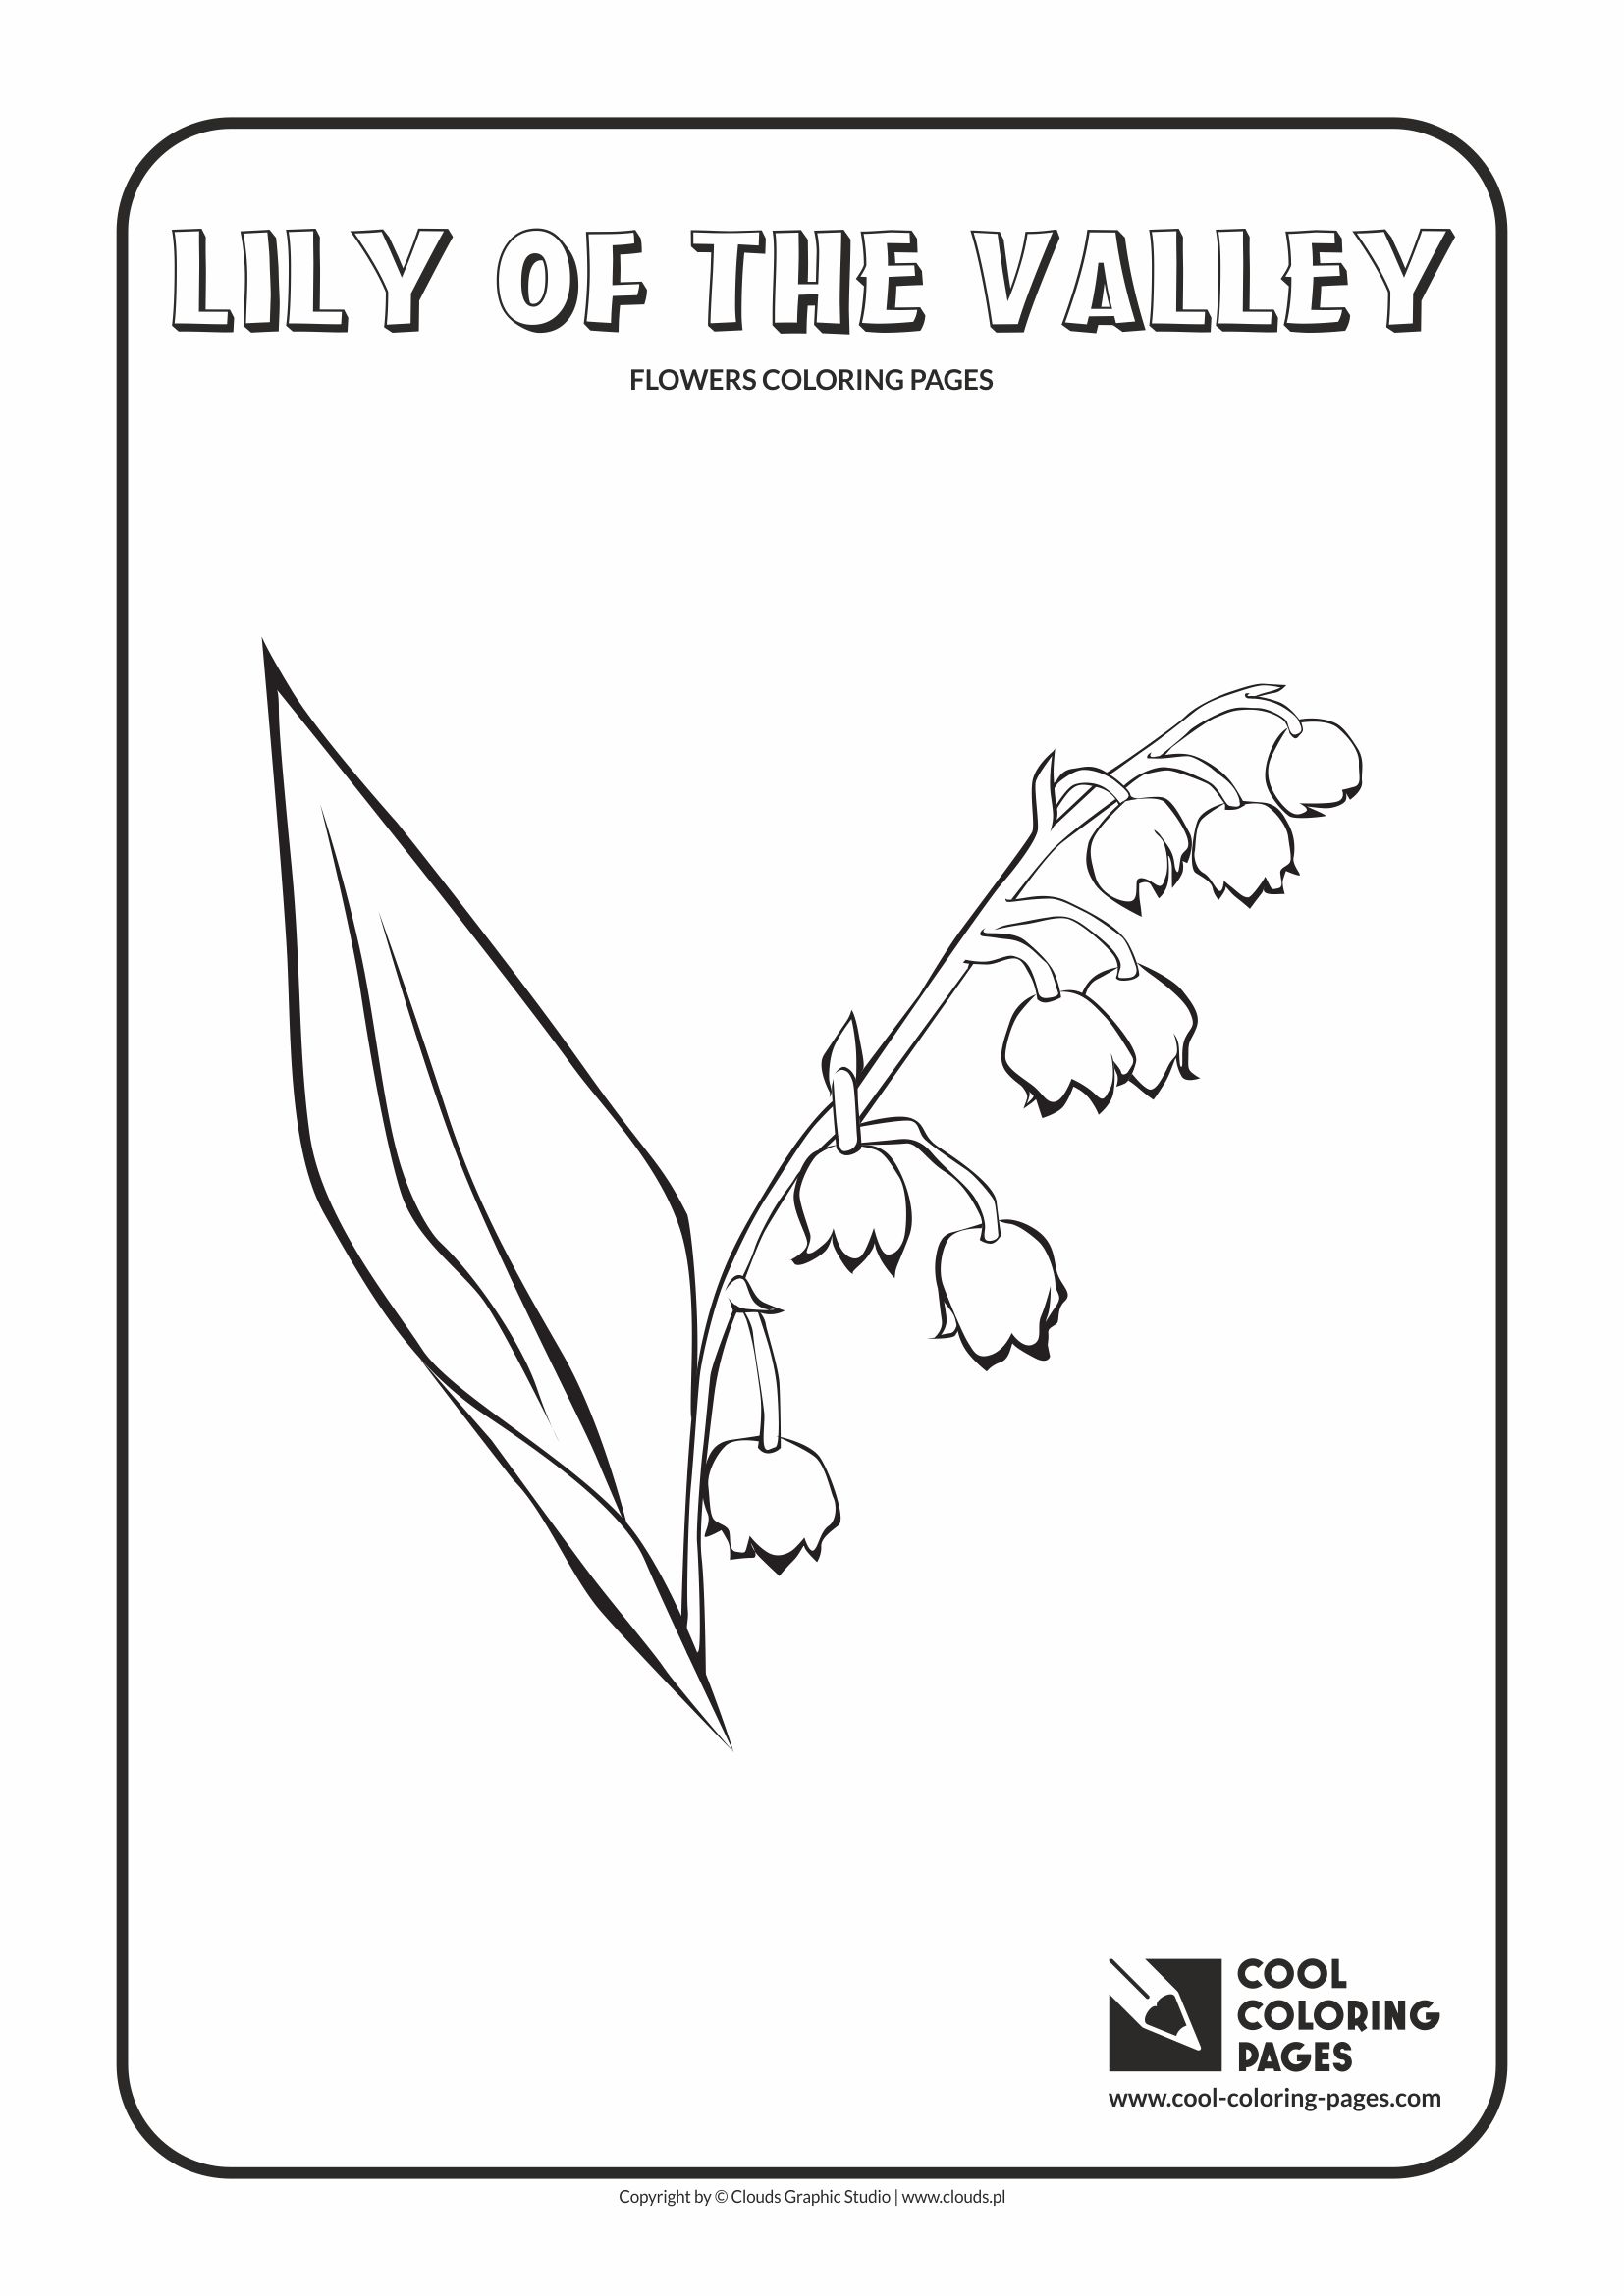 Cool Coloring Pages - Plants / Lily of the valley / Coloring page with lily of the valley